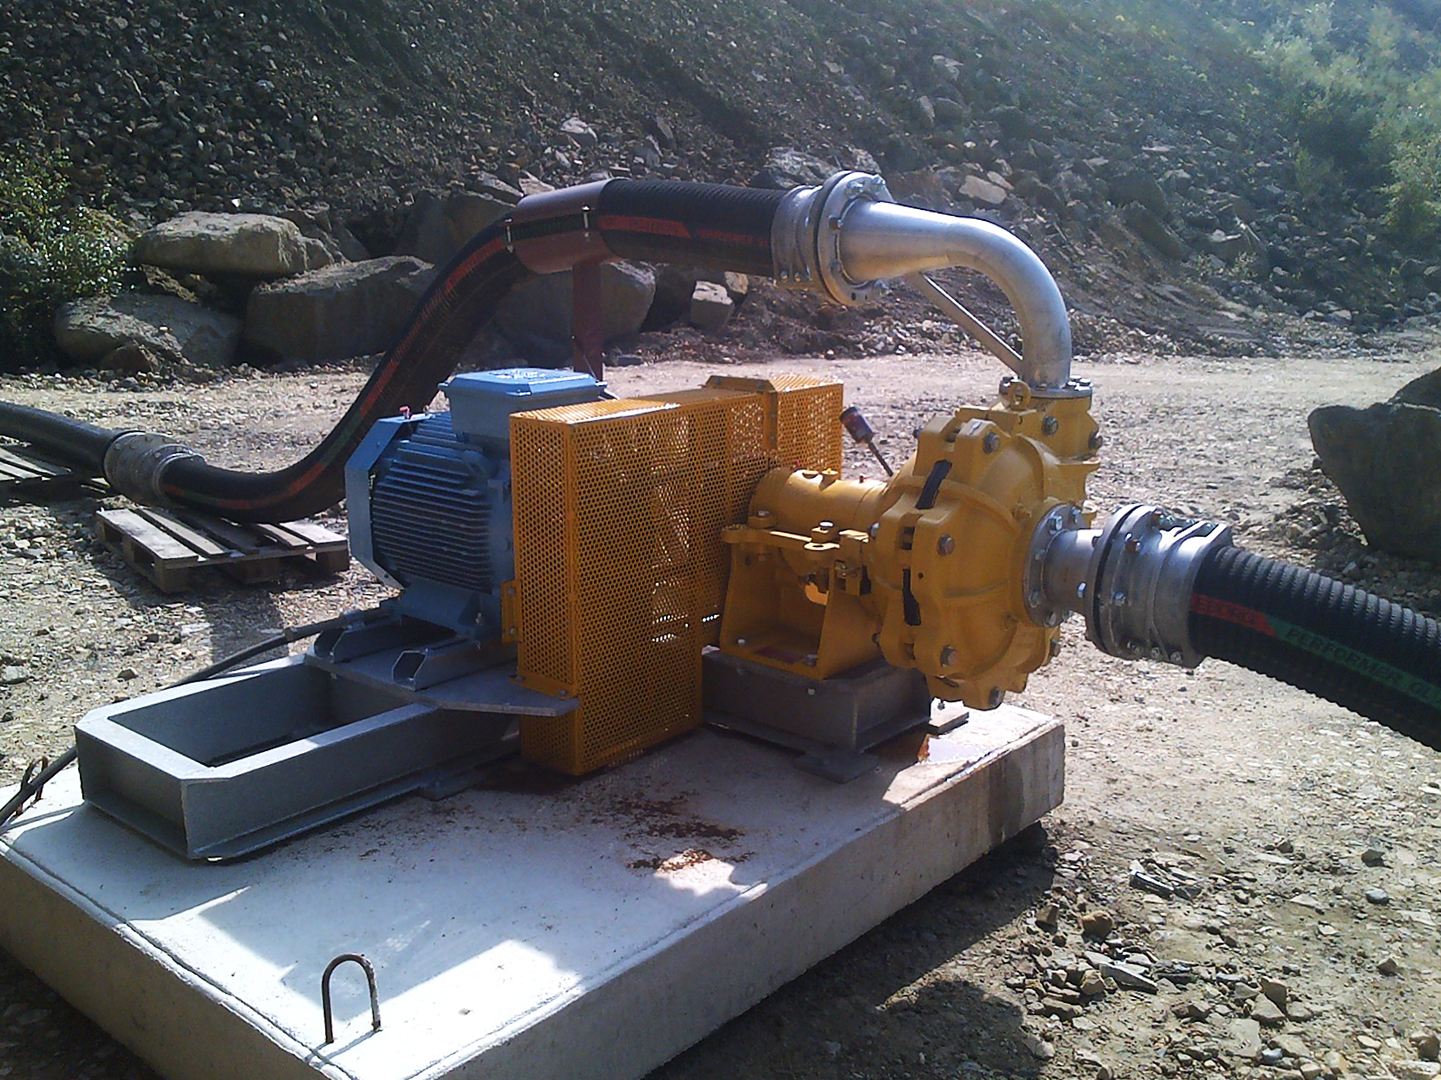 Sulzer’s extensive range of pumps includes many drainage and dewatering solutions